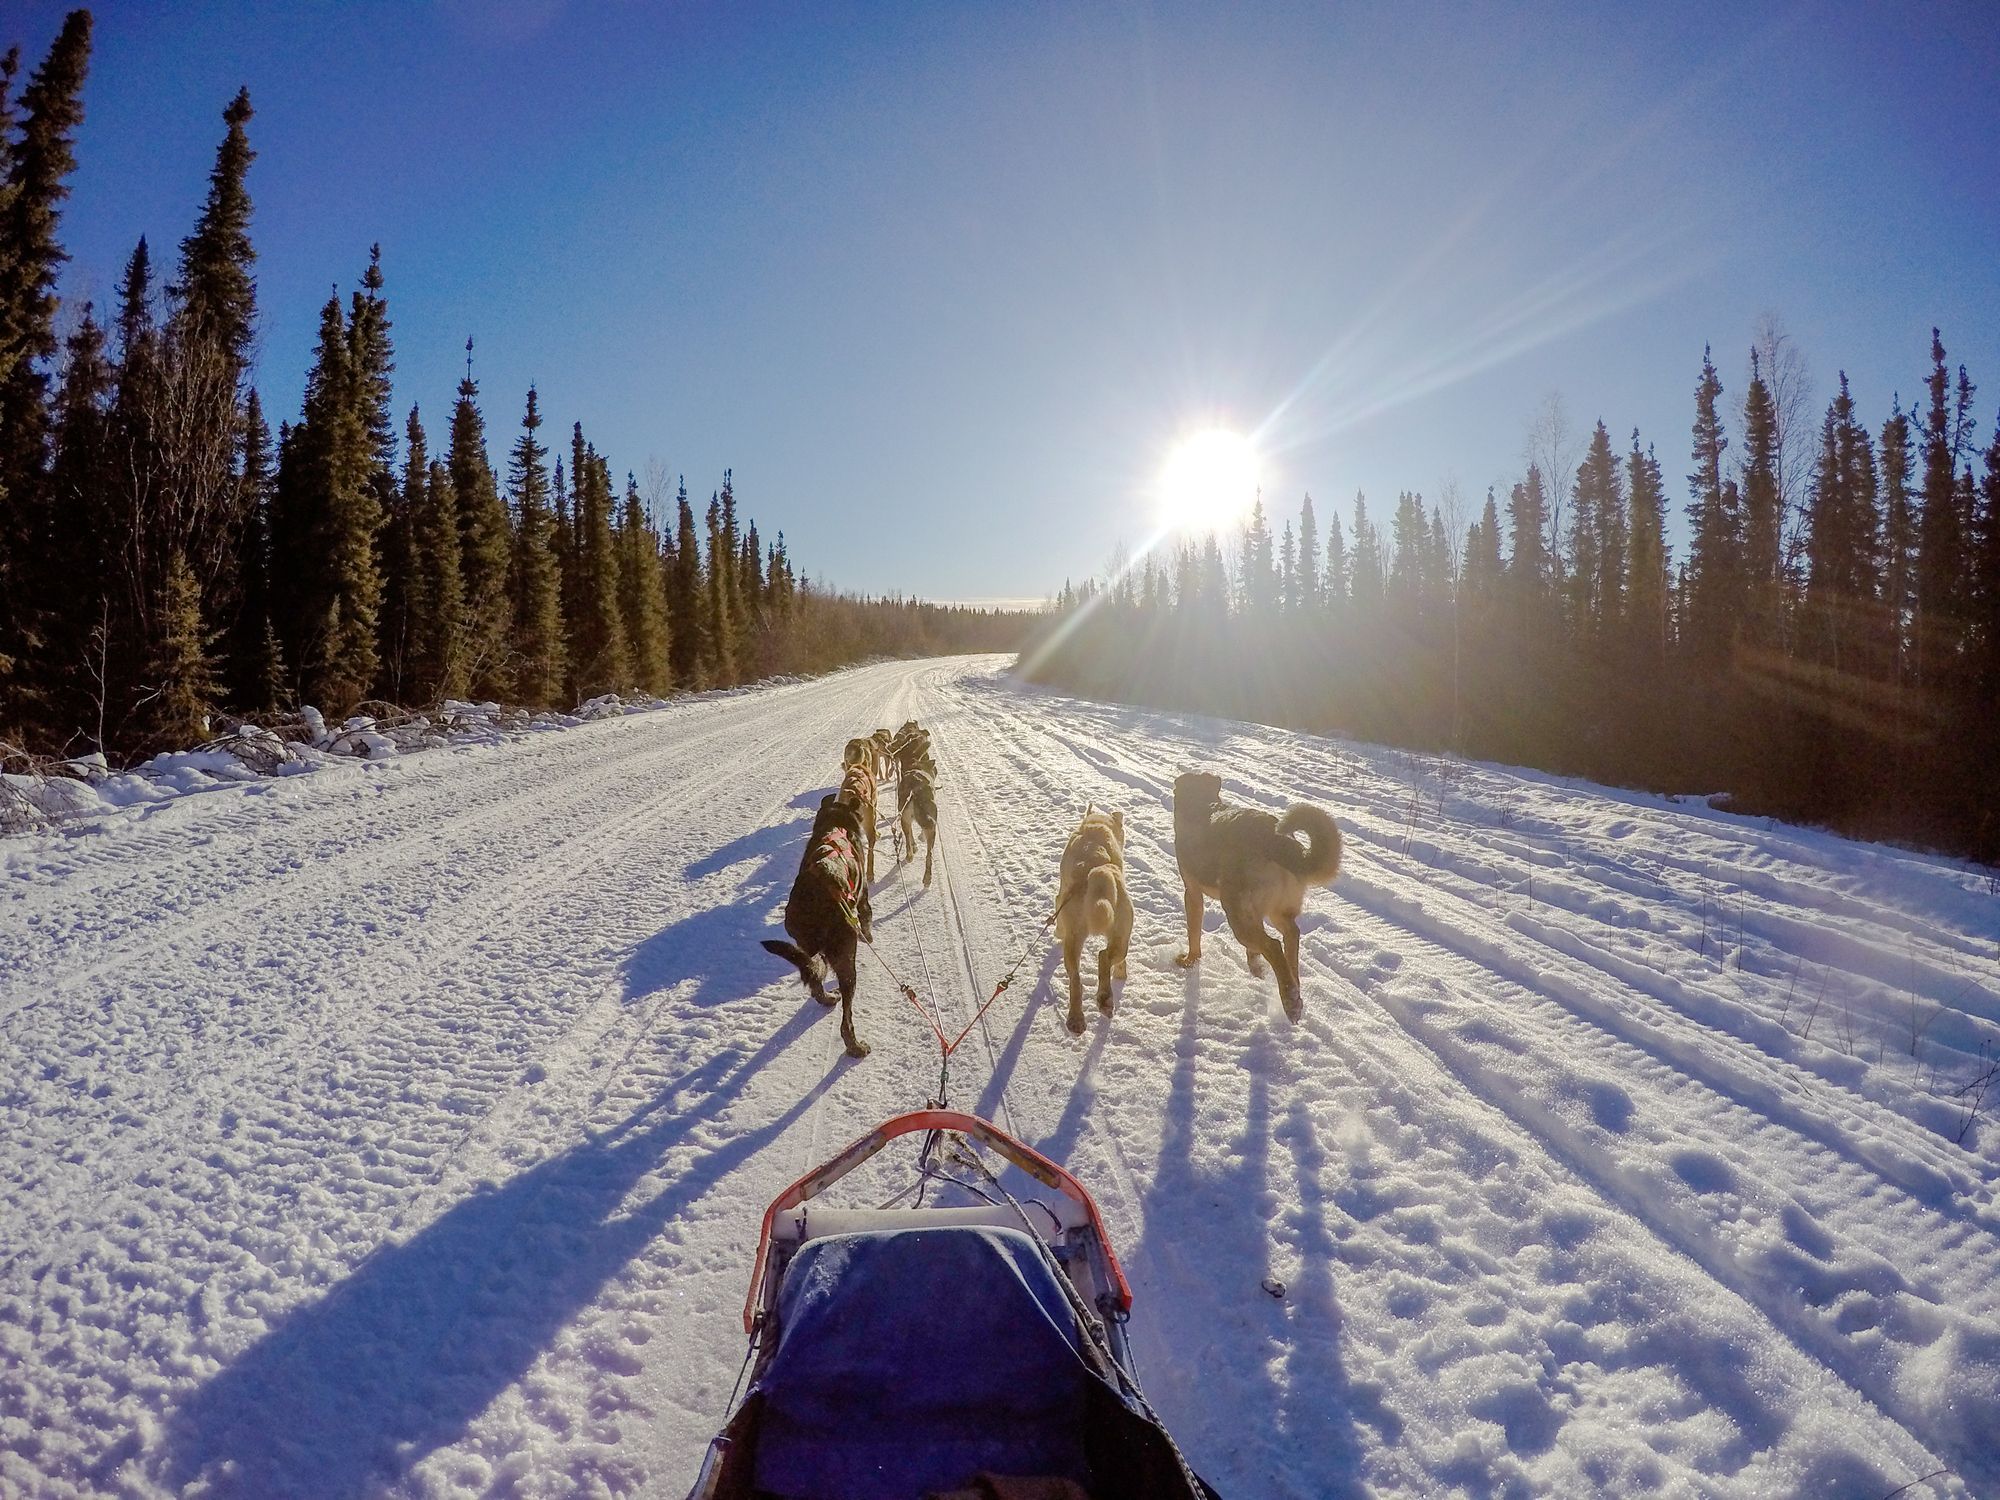 Sled dogs pulling a sled in Alaska.